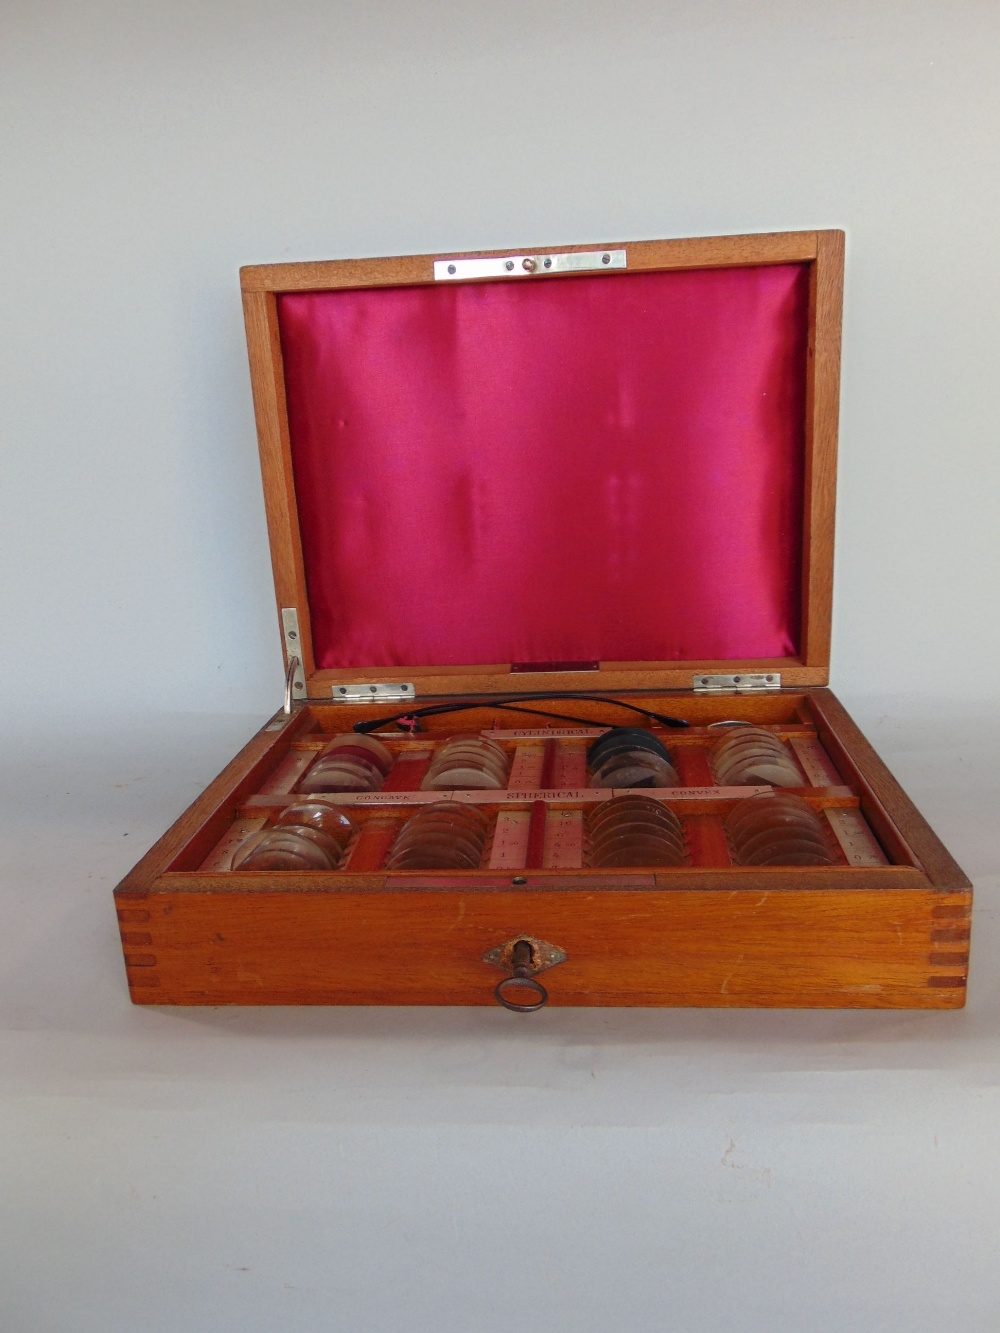 19th century mahogany cased opticians lens by Petit and Whitelaw of Dundee Aberdeen